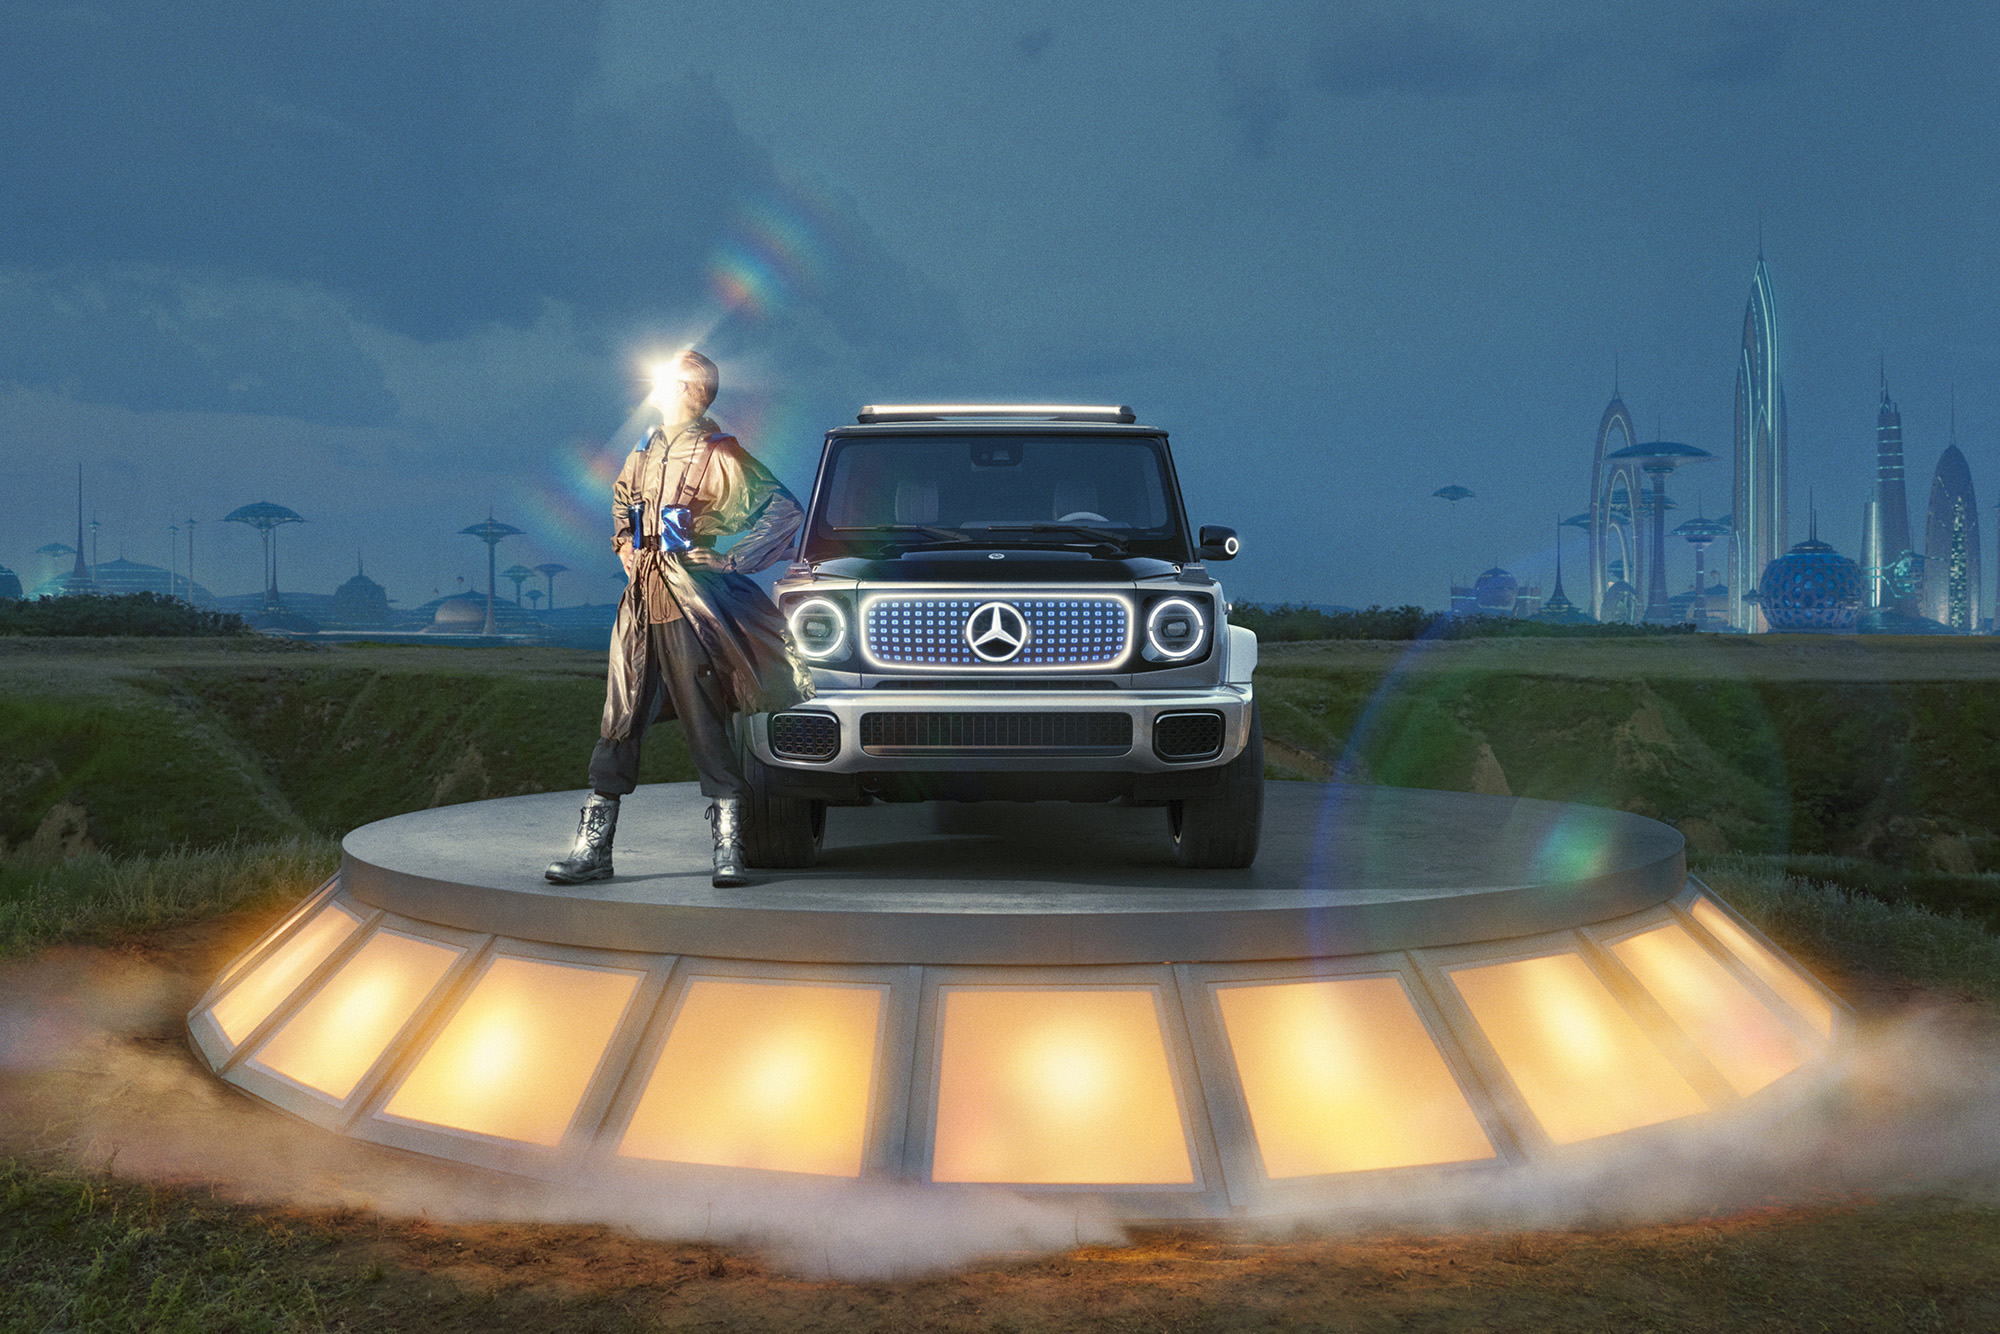 Mercedes-Benz EQG front view on elevated circular platform with ground lighting